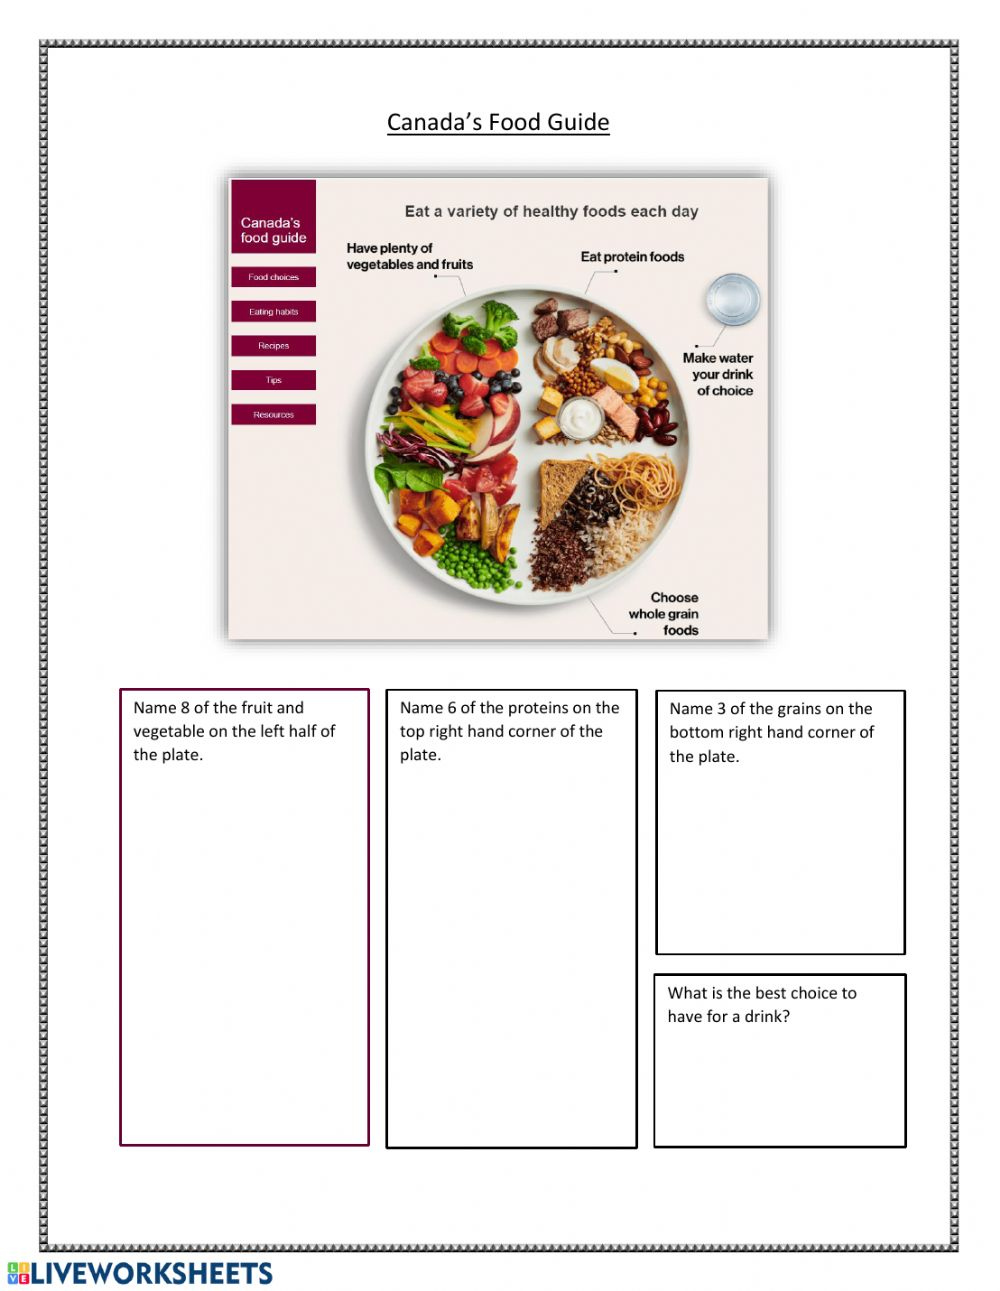 Canada 39 s Food Guide Questions Worksheet